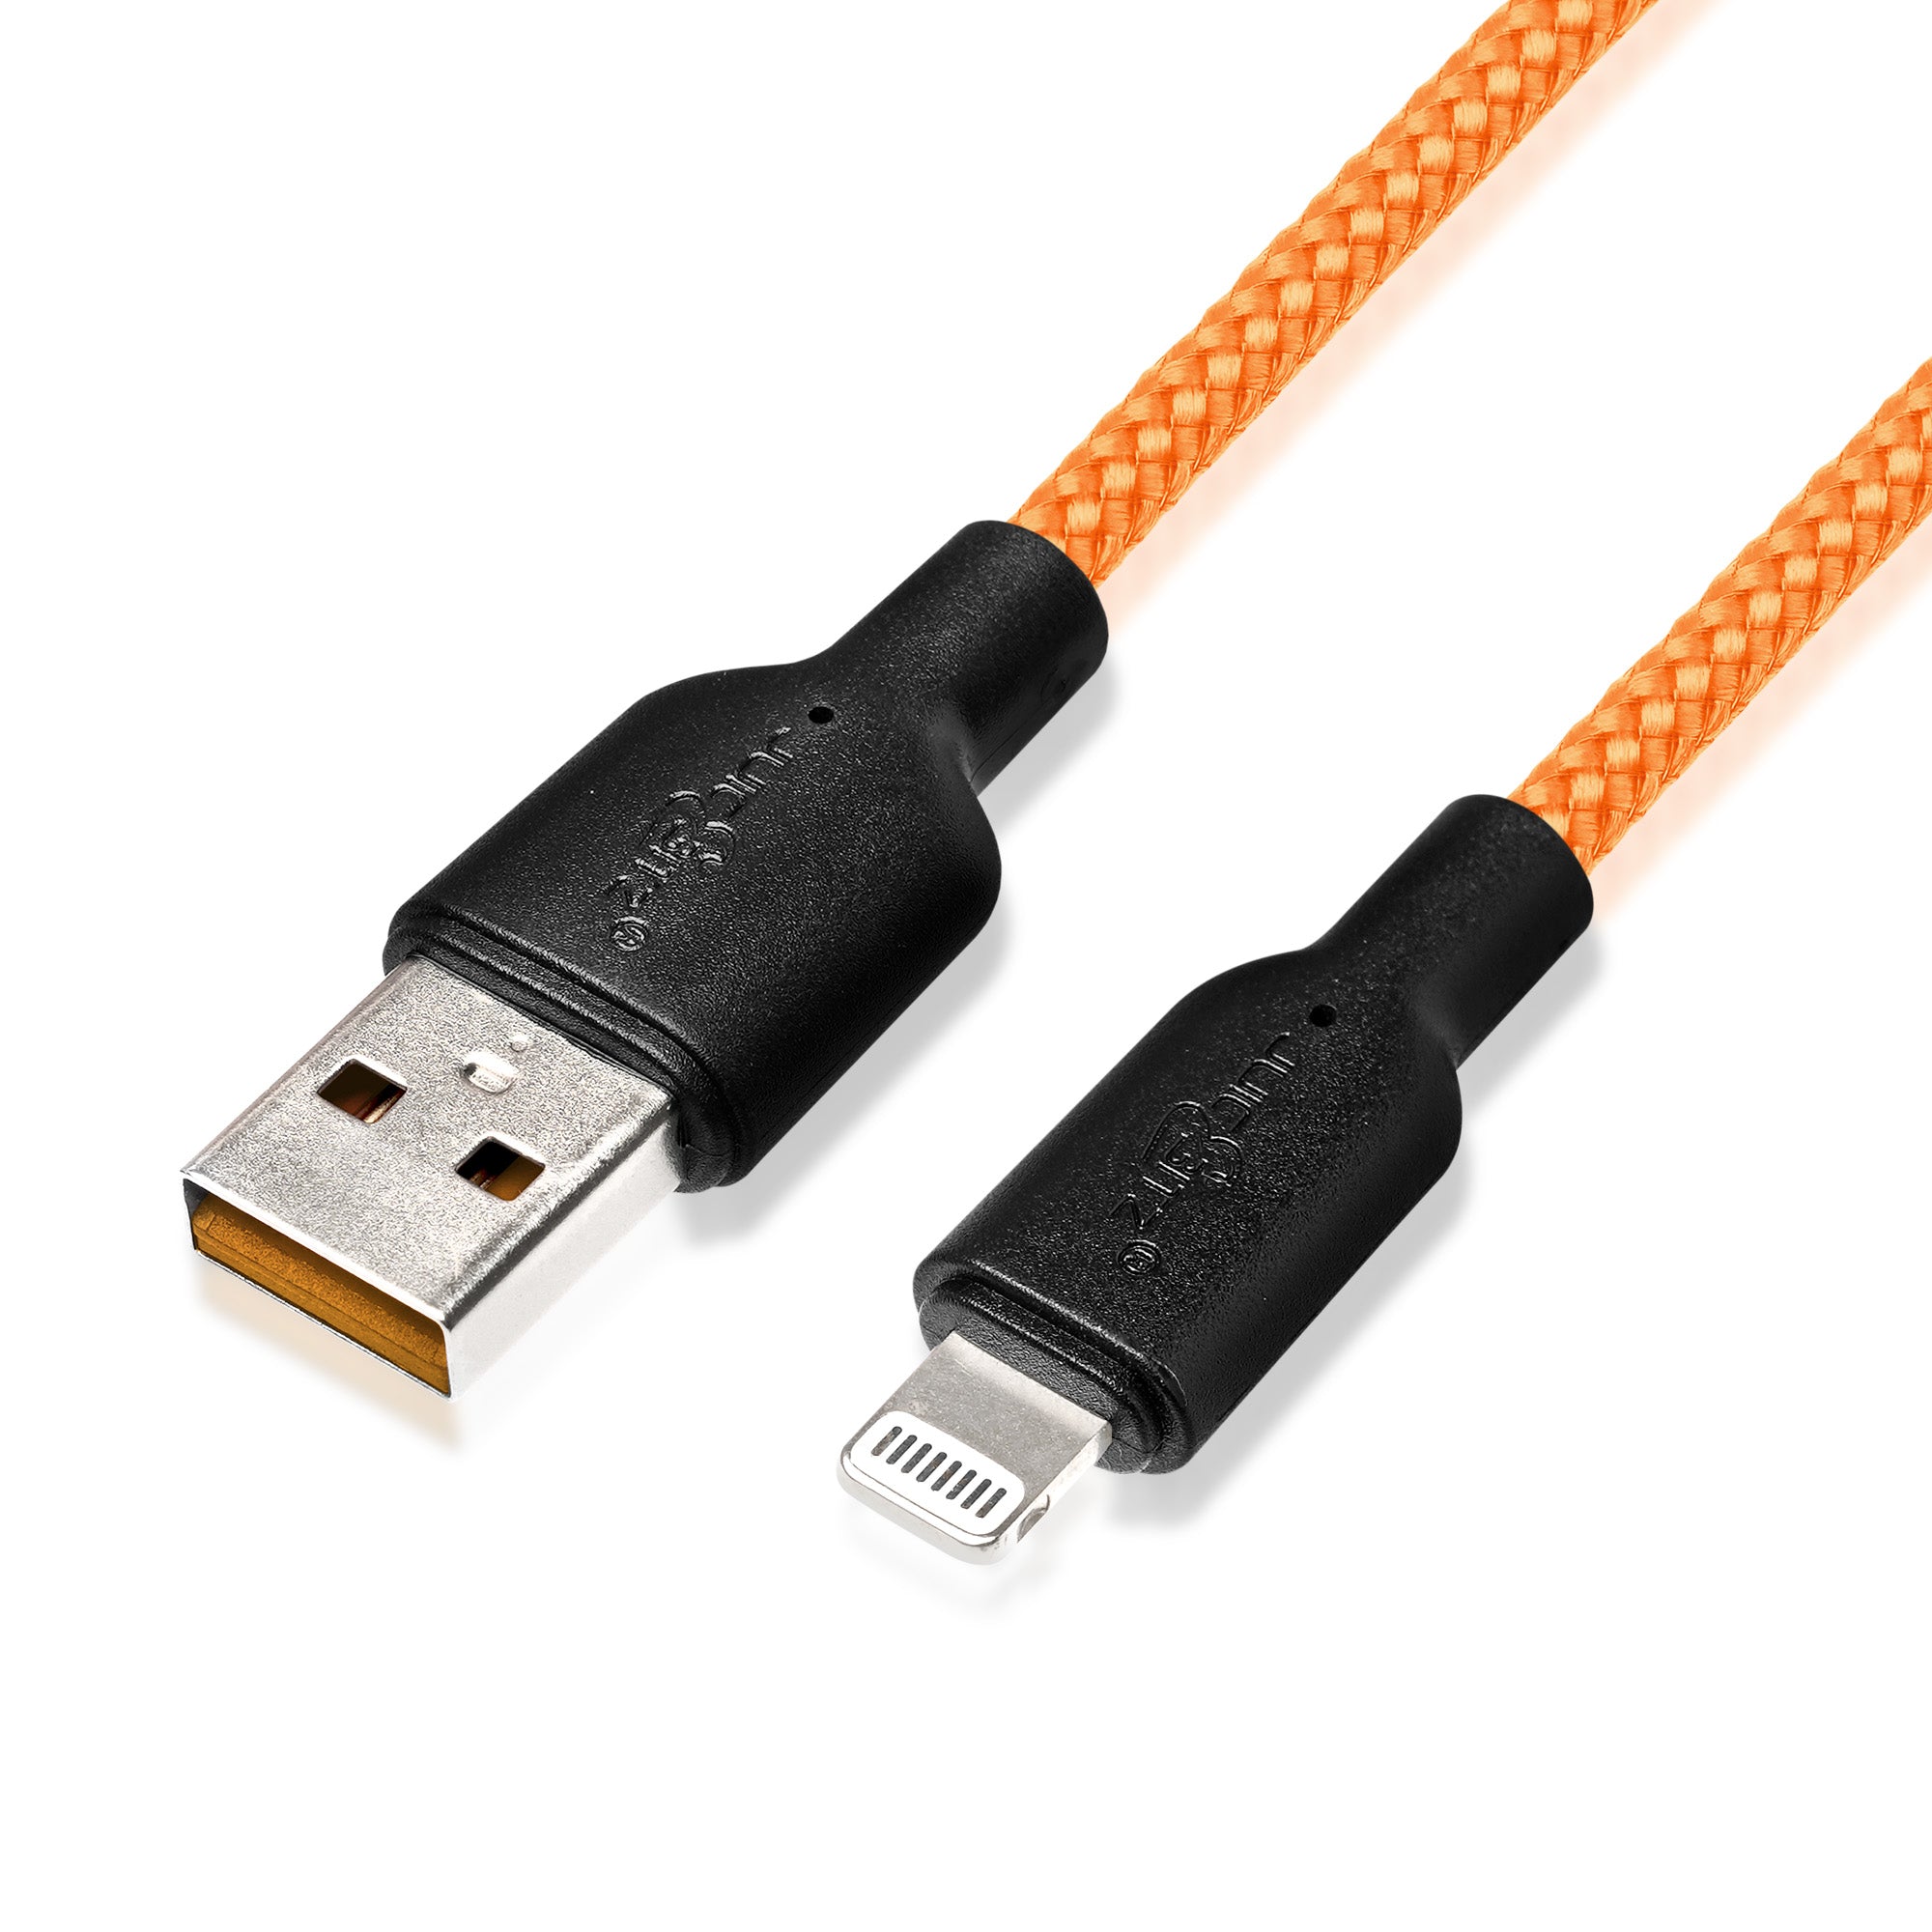 Braided Heavy Duty USB Charger Cable Data Sync Wire Lead for iPhone, iPad, iPod - Orange